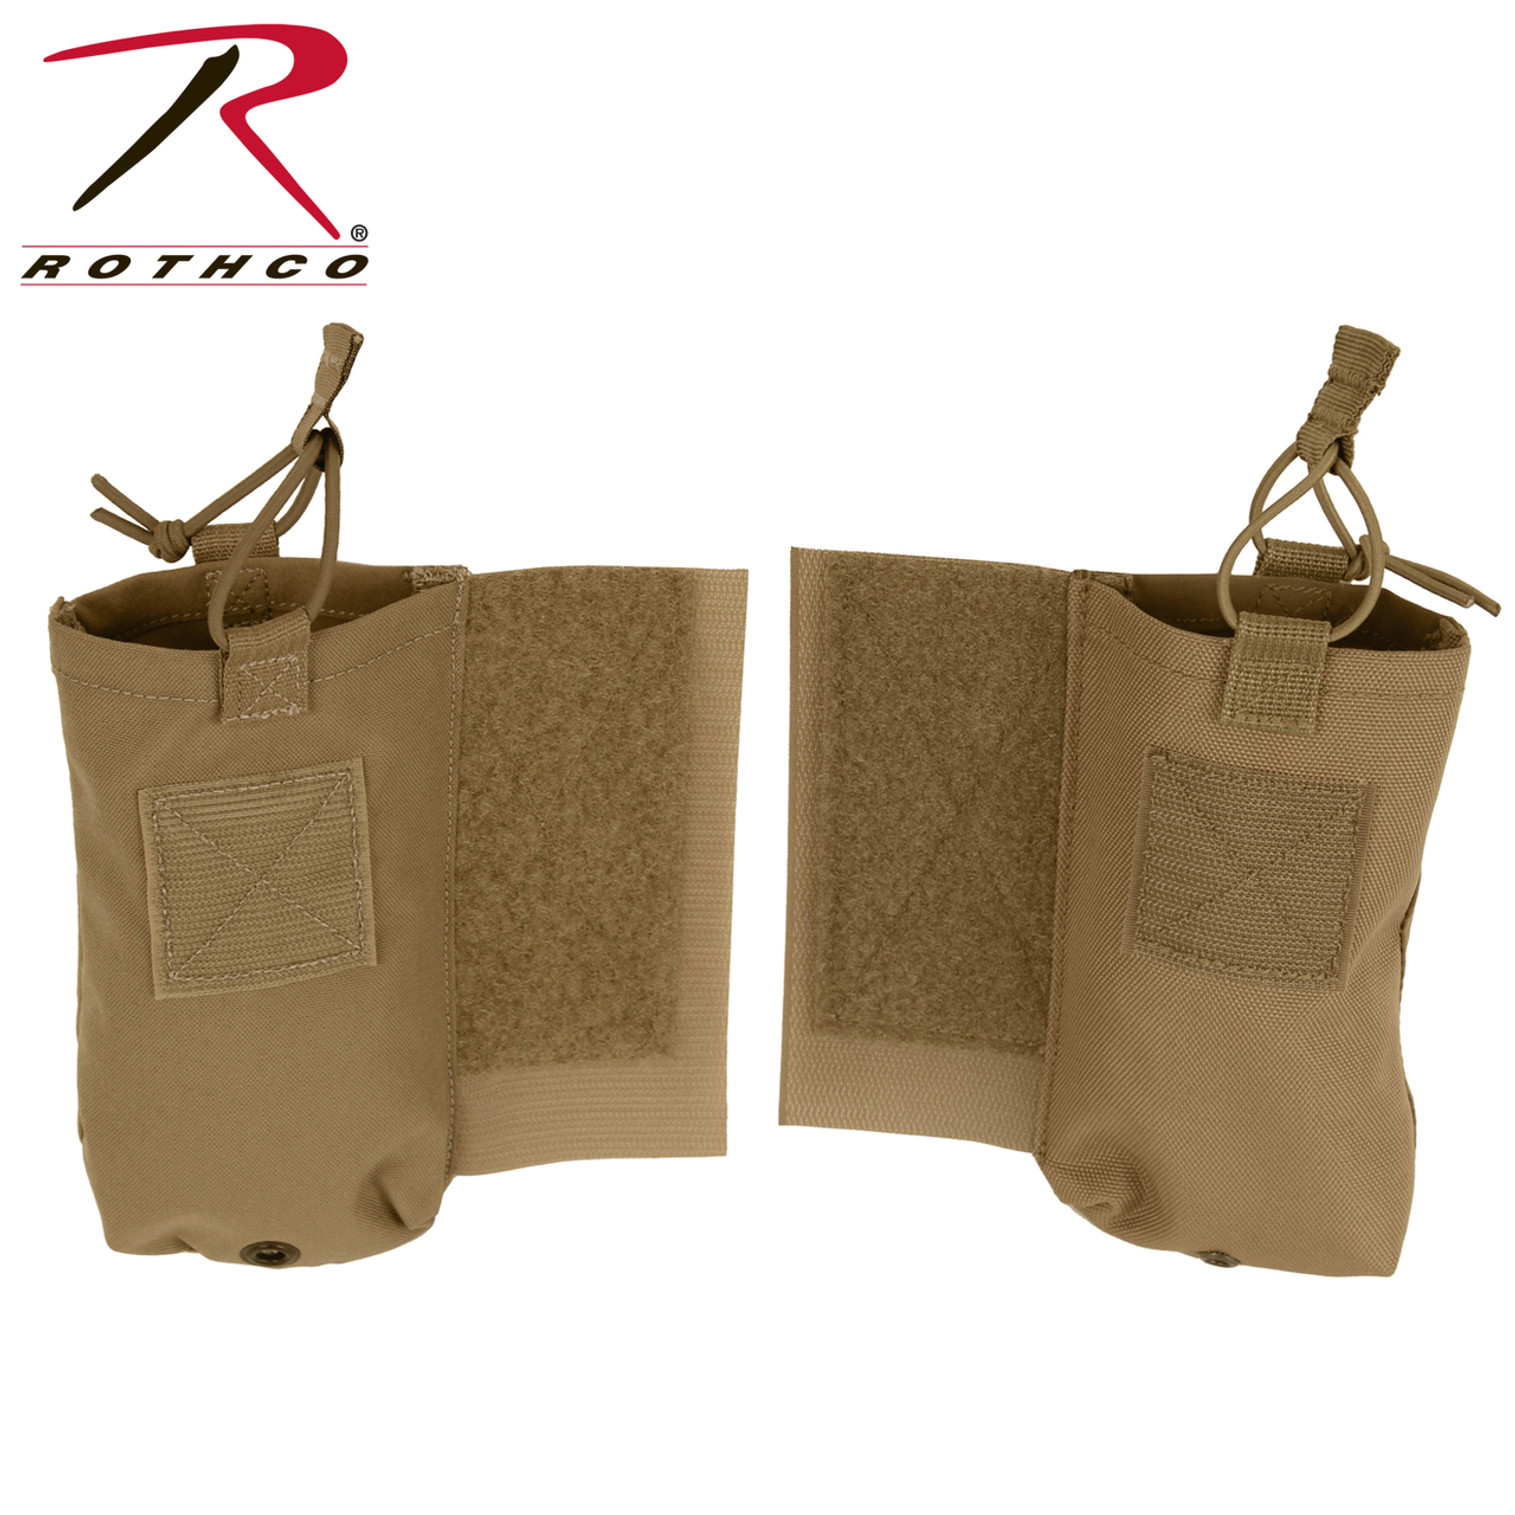 Rothco LACV Side Radio Pouch Set - Coyote Brown